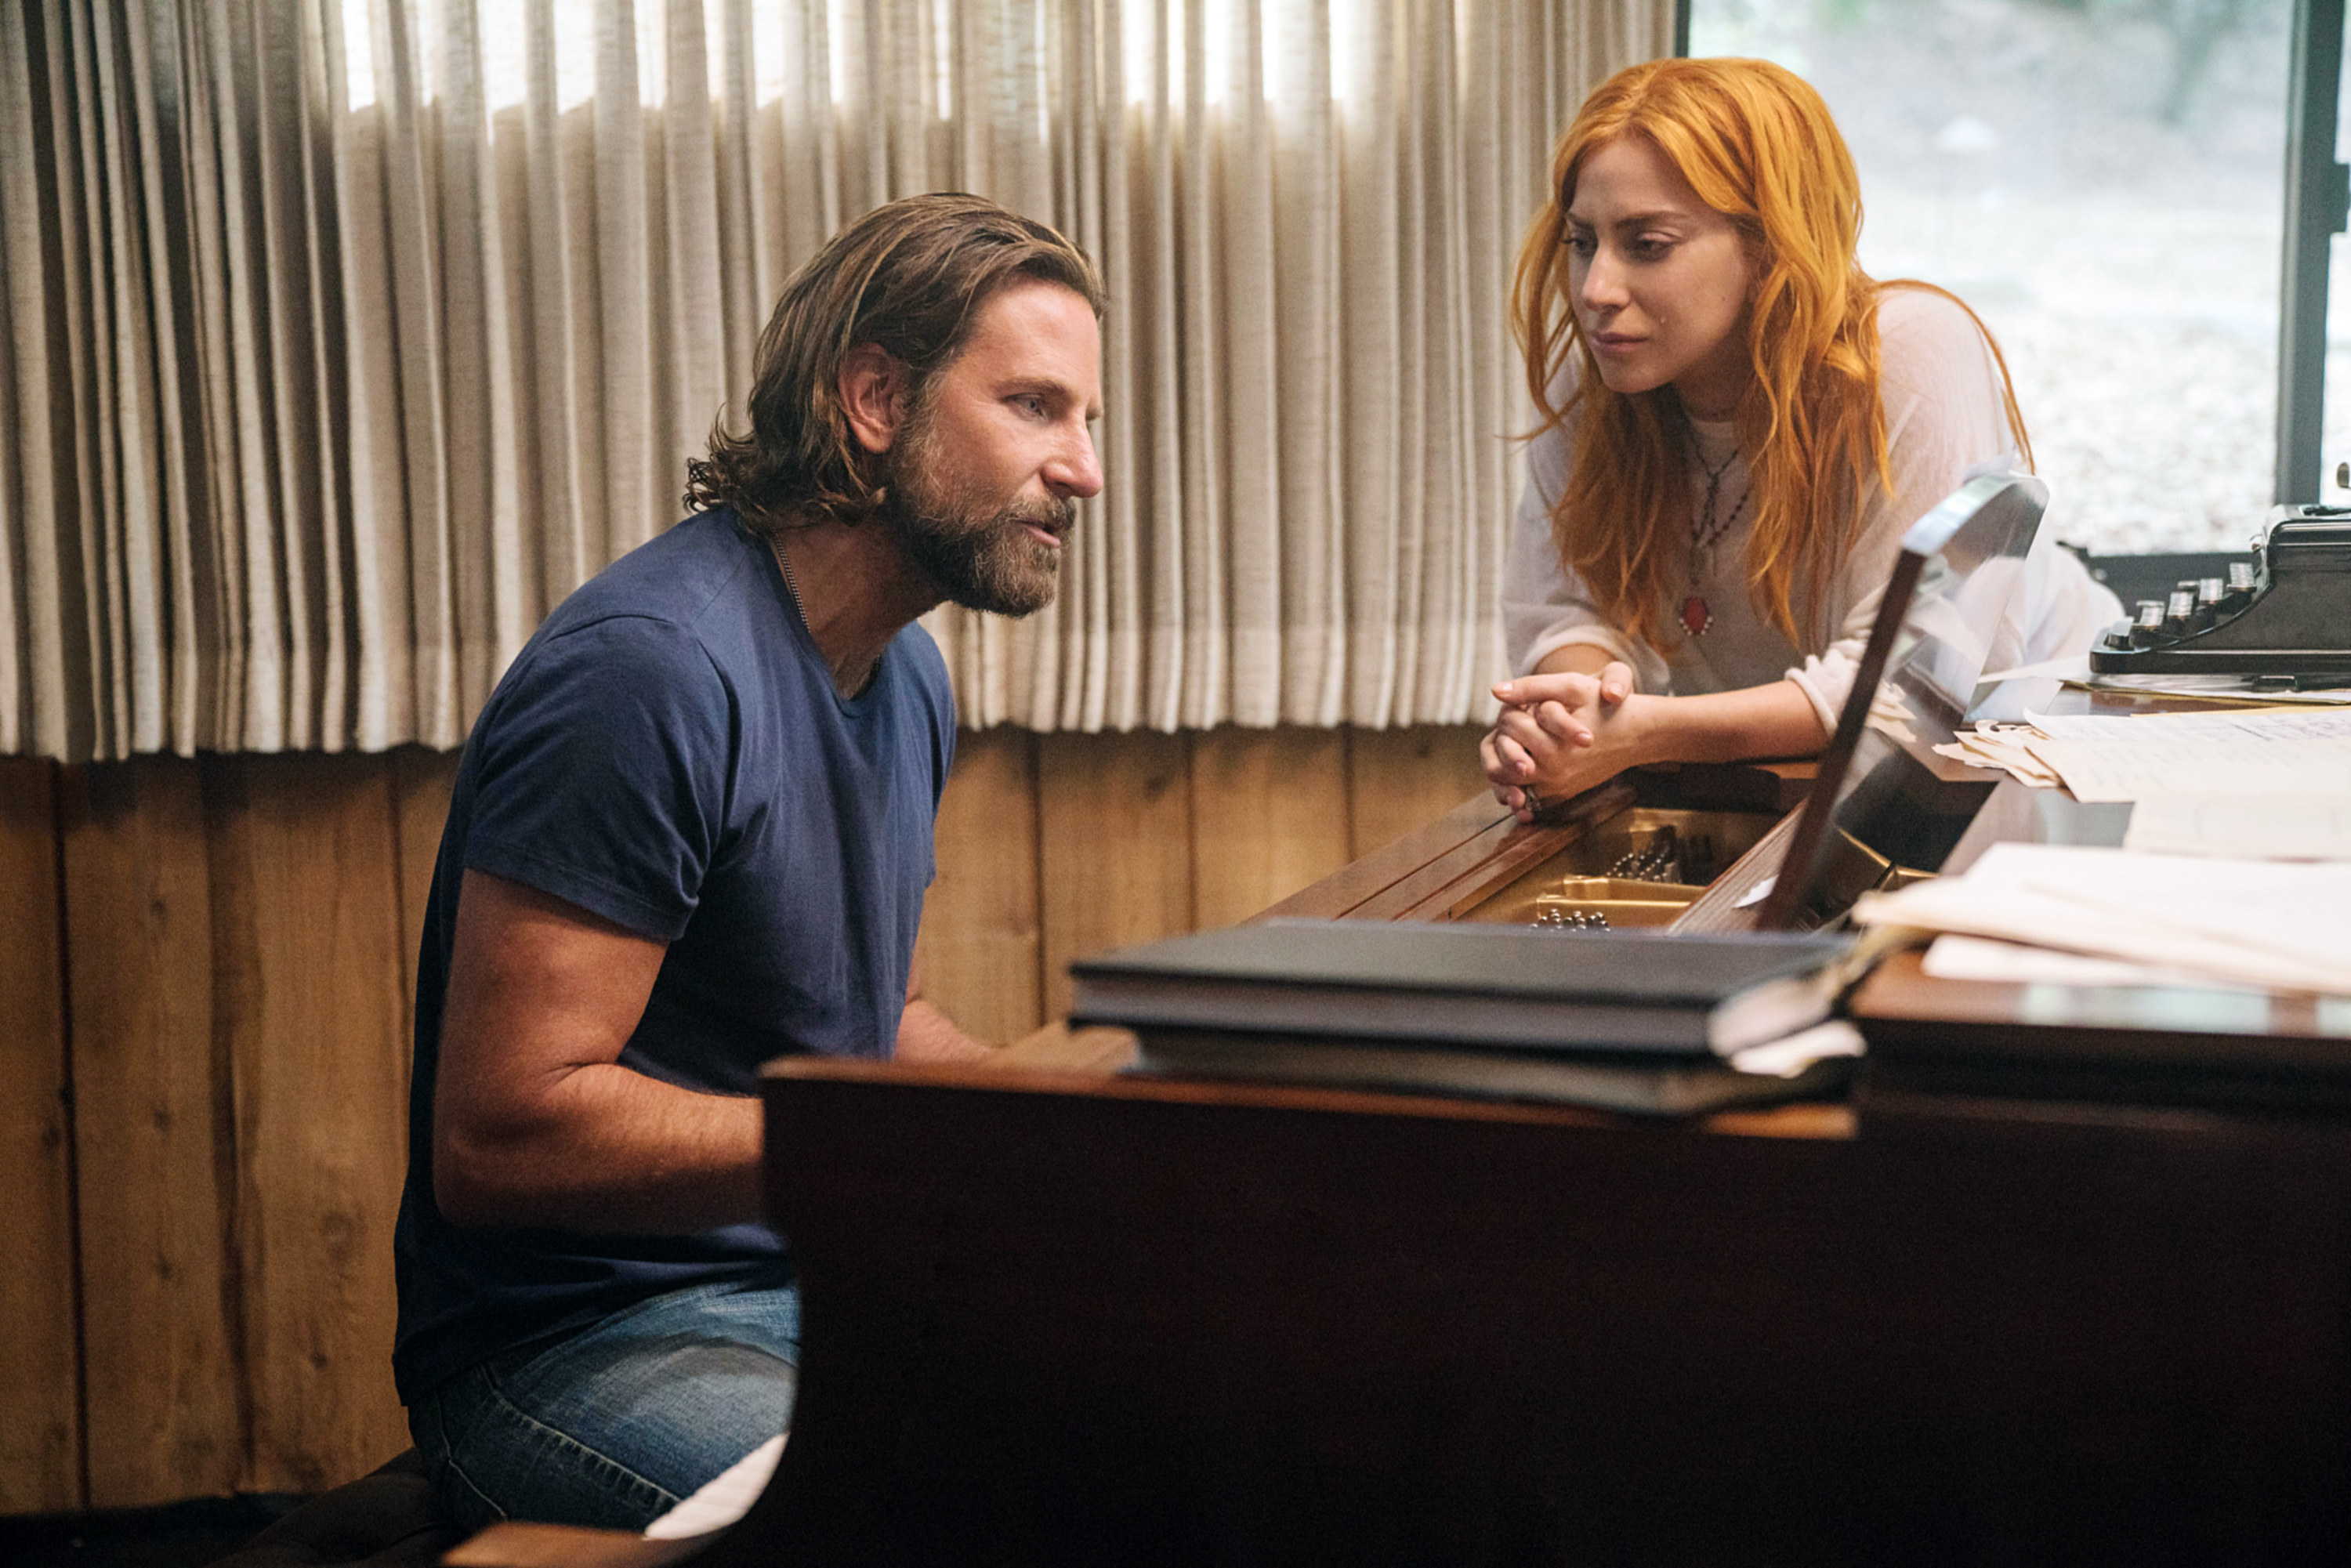 Ally standing by a piano in a scene from A Star is Born